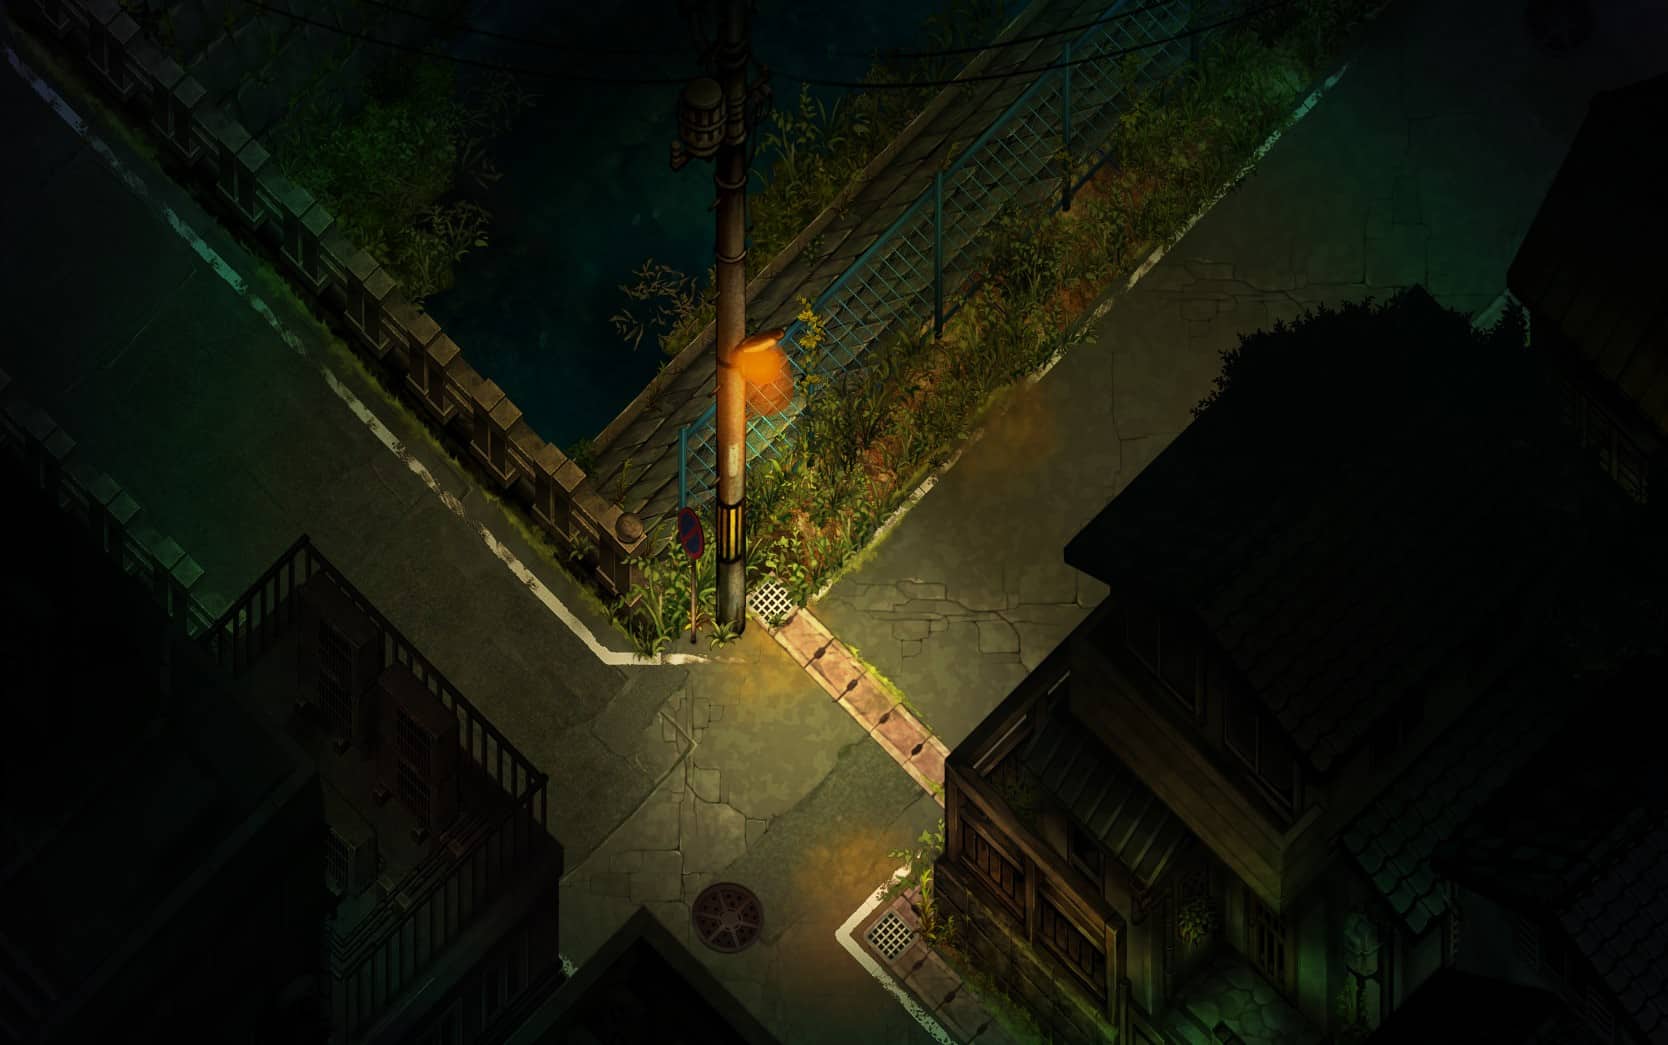 Yomawari: Lost in the Dark [Deluxe Edition], Yomawari 3, Yomawari: Lost in the Dark, Yomawari Lost in the Dark, Switch, PS4, PlayStation 4, pre-order, gameplay, features, price, trailer, Nintendo Switch, Europe, US, North America, screenshots, NIS America